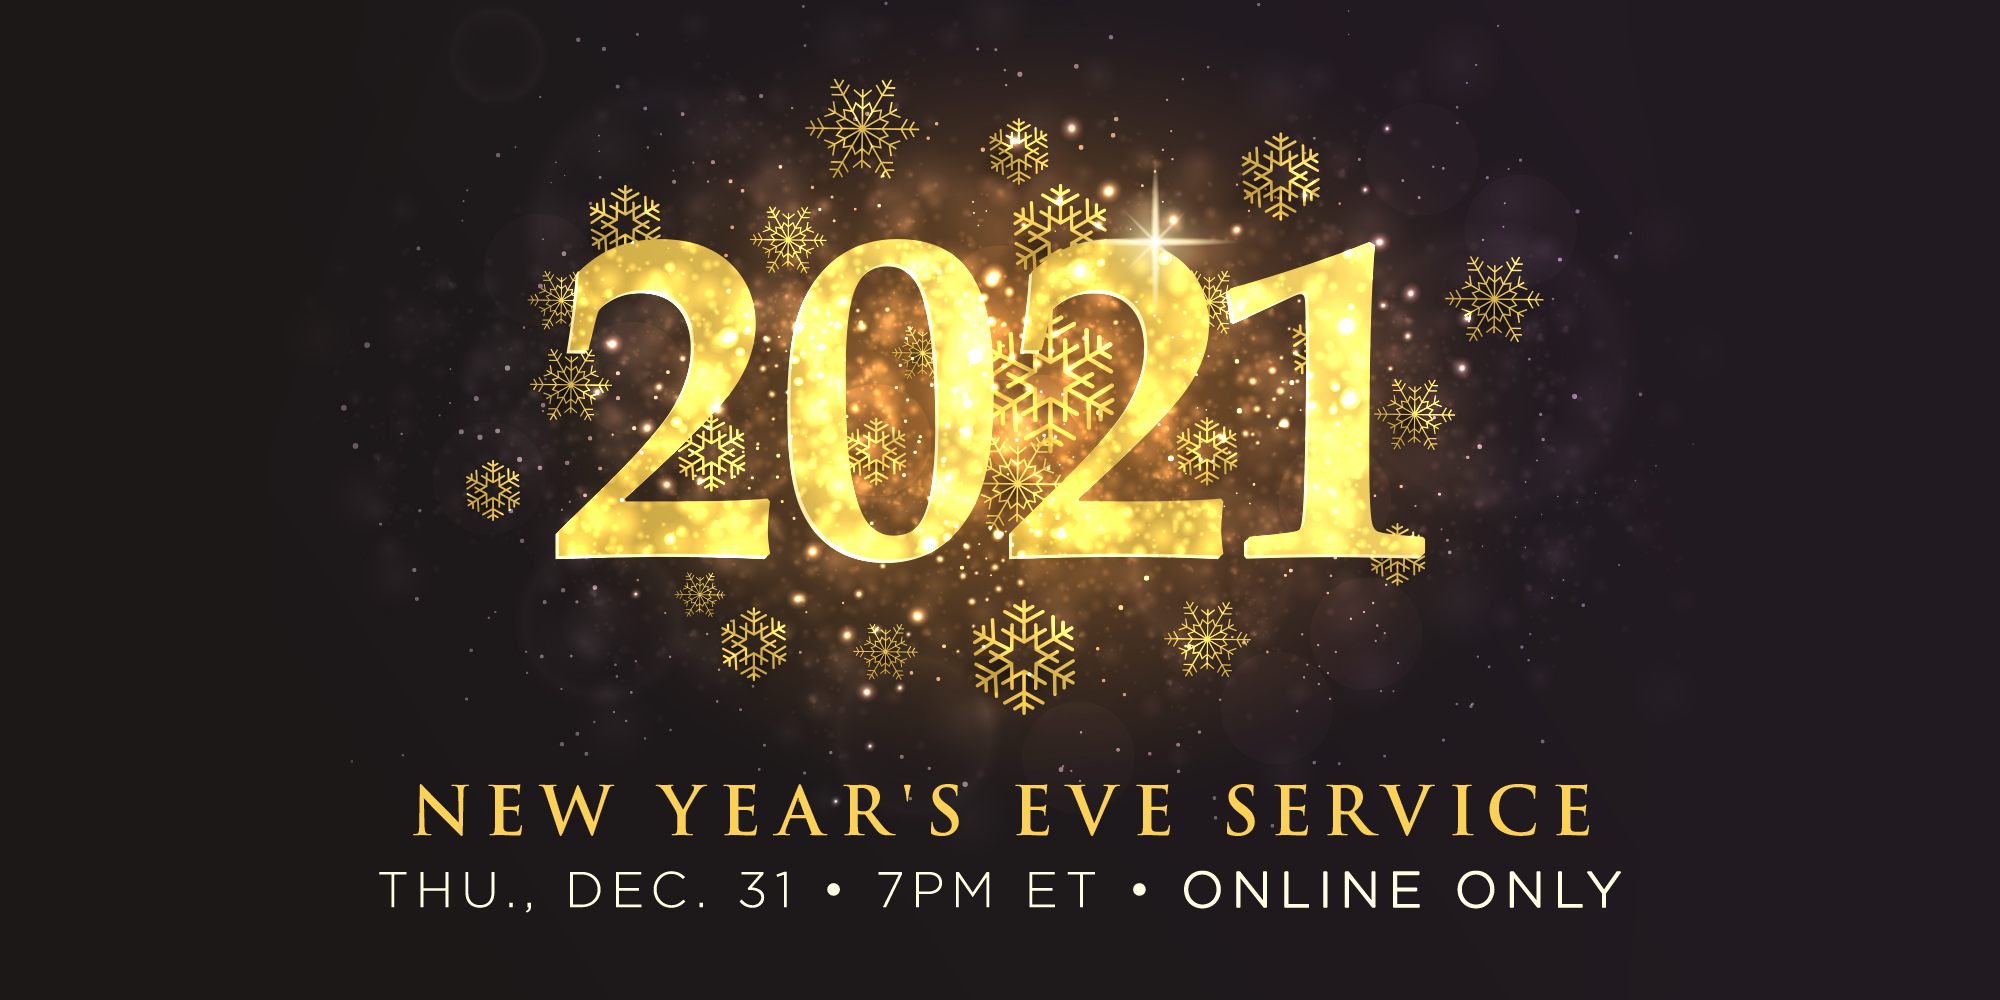 2021 New Year's Eve Service Thu., Dec. 31 7PM ET Streaming Live Online